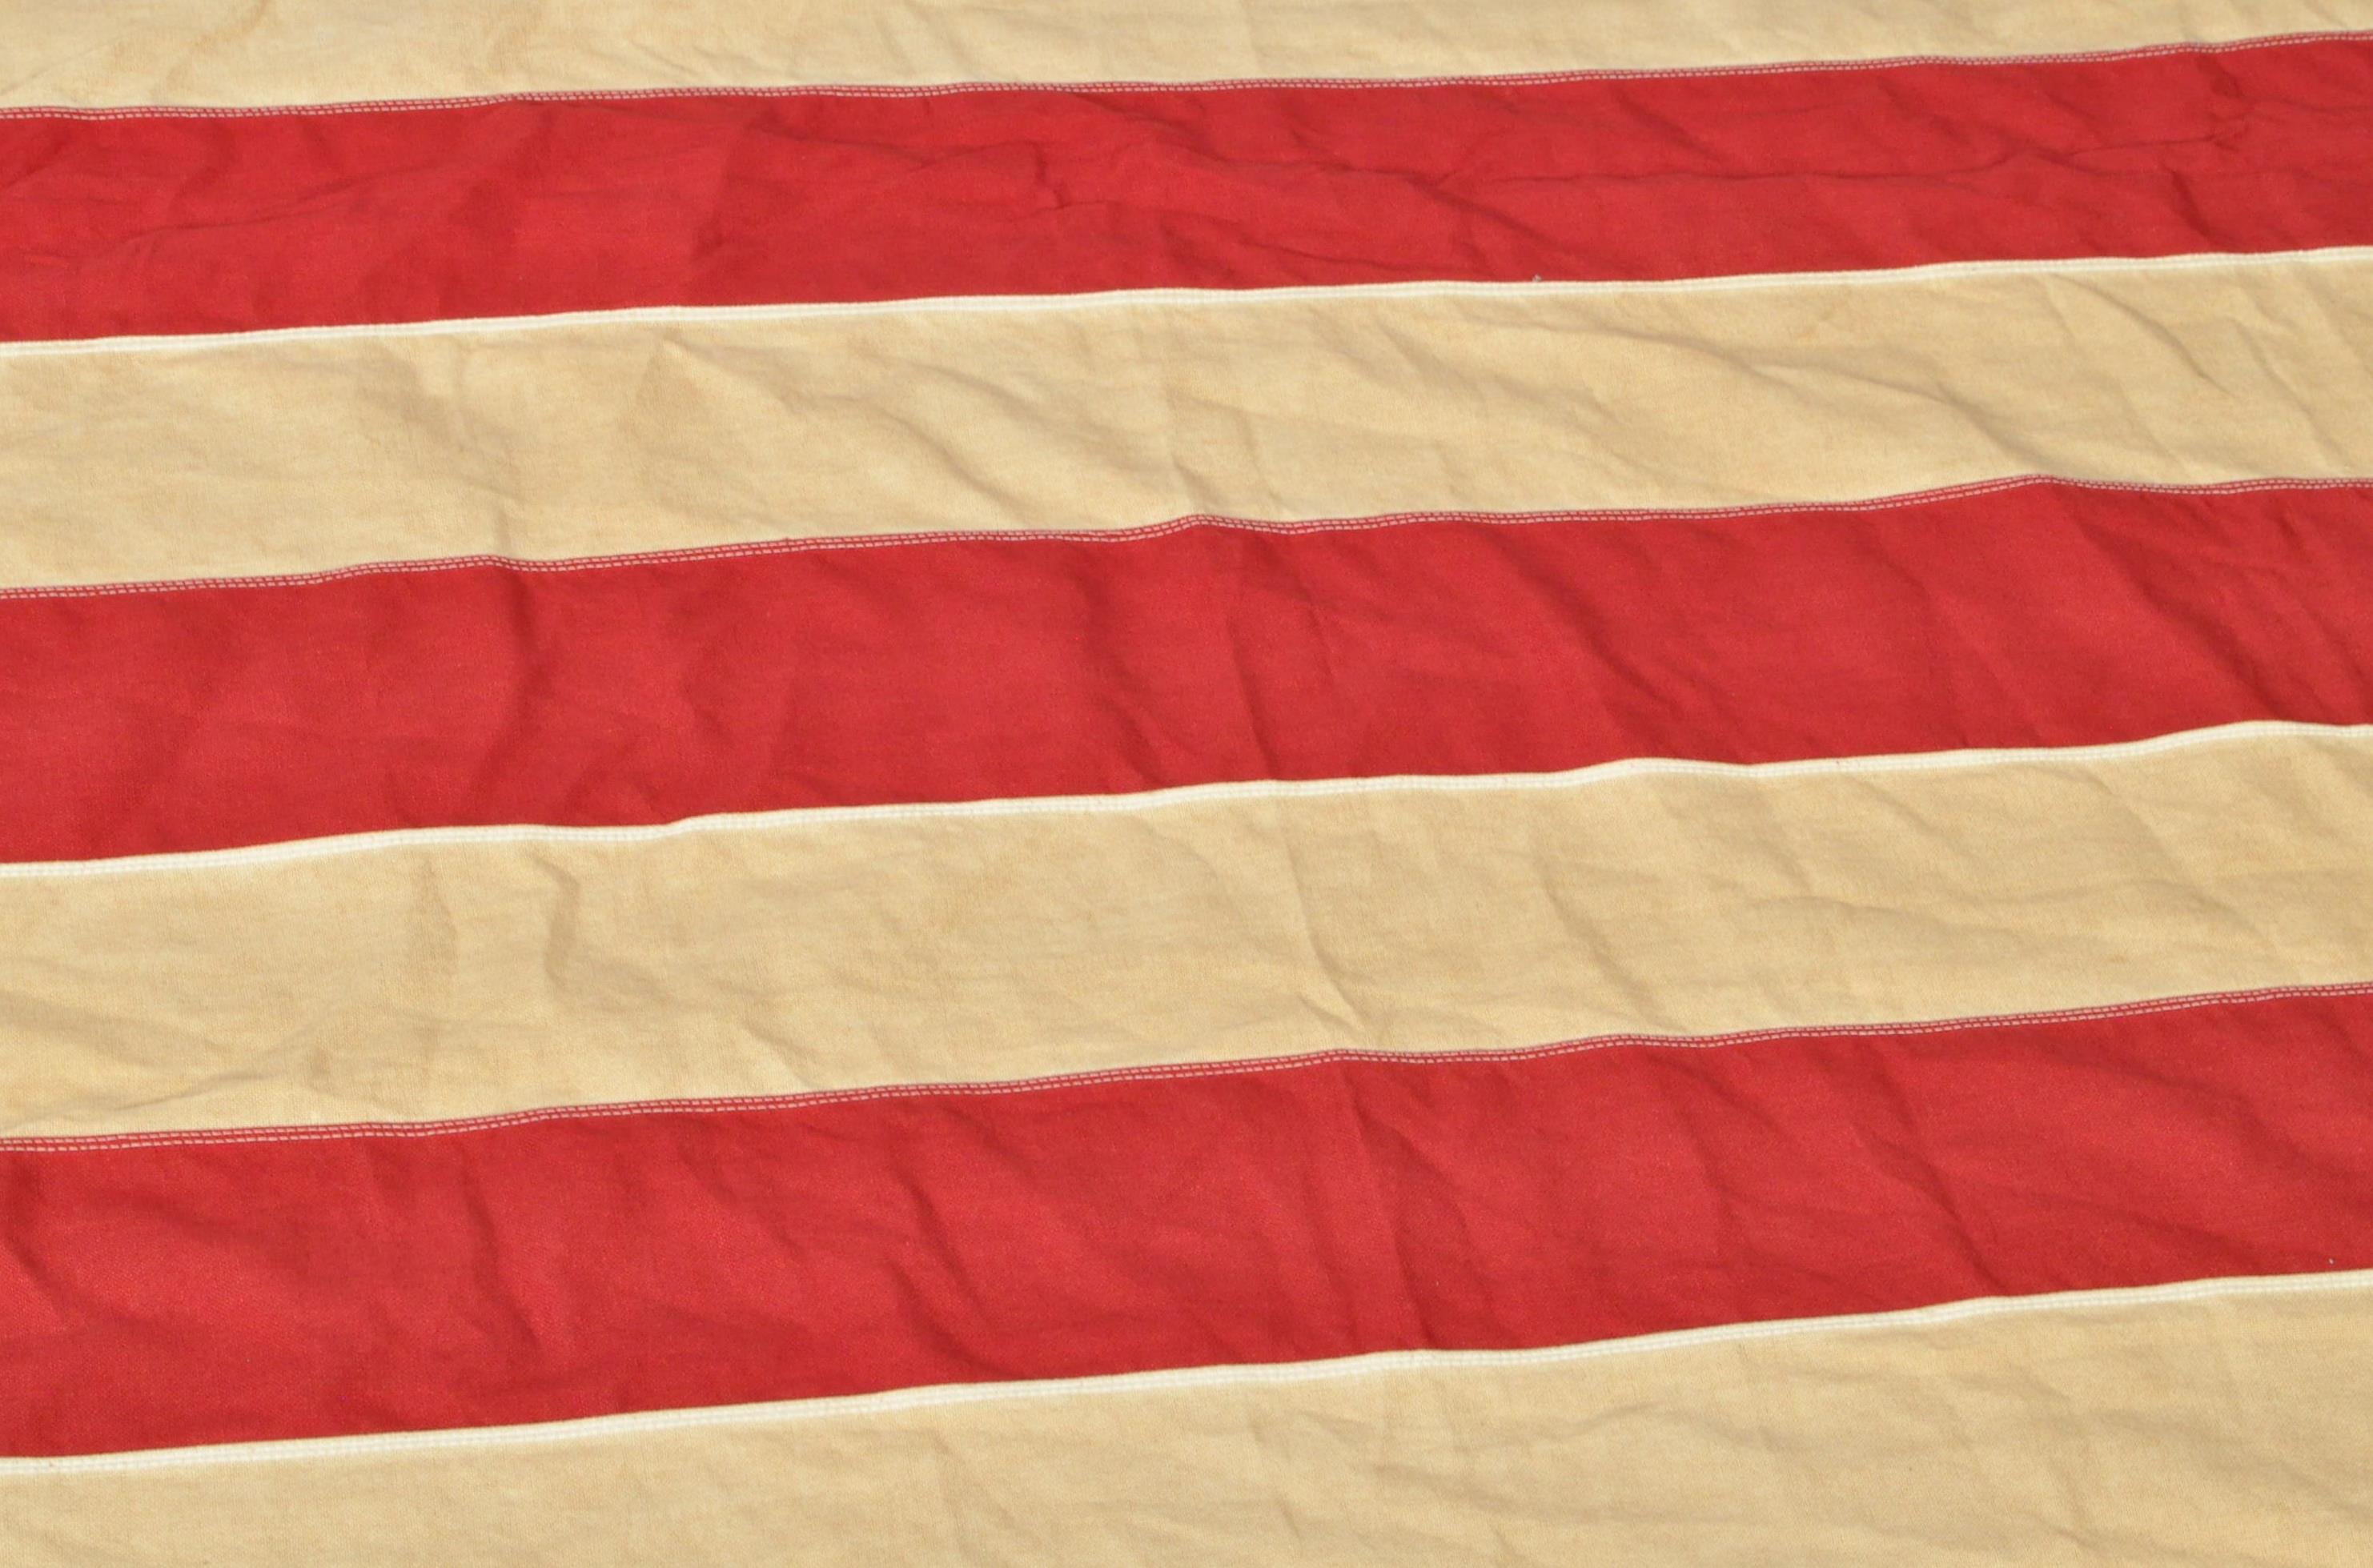 WWII SECOND WORLD WAR INTEREST - US NAVY FLAG - LCL 87 - Image 3 of 4